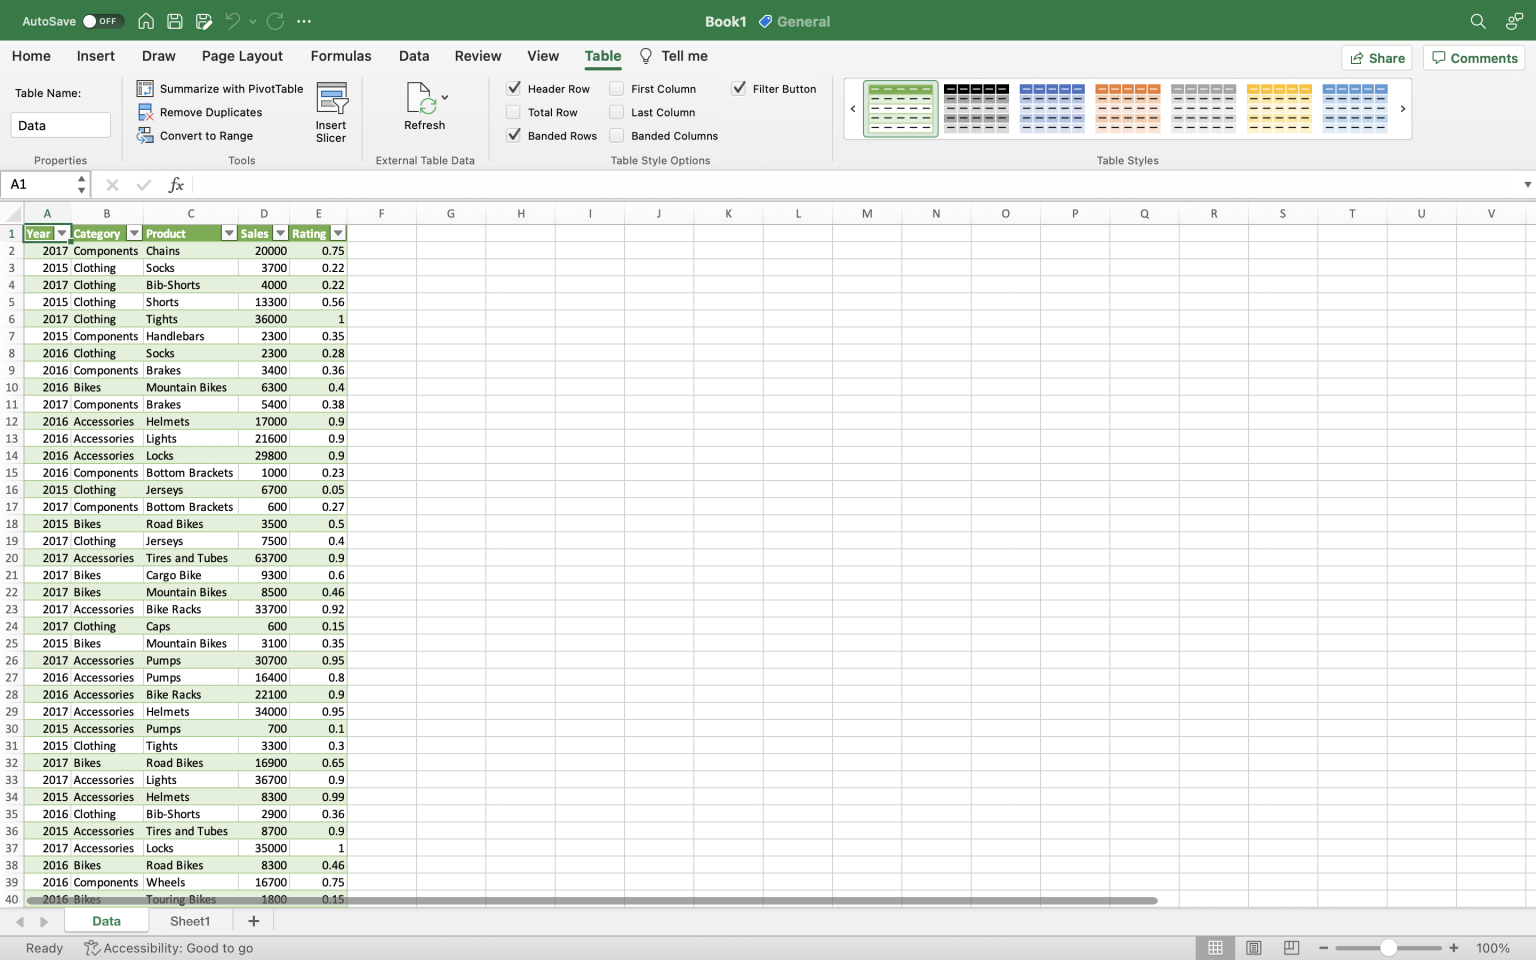 power query in excel for mac